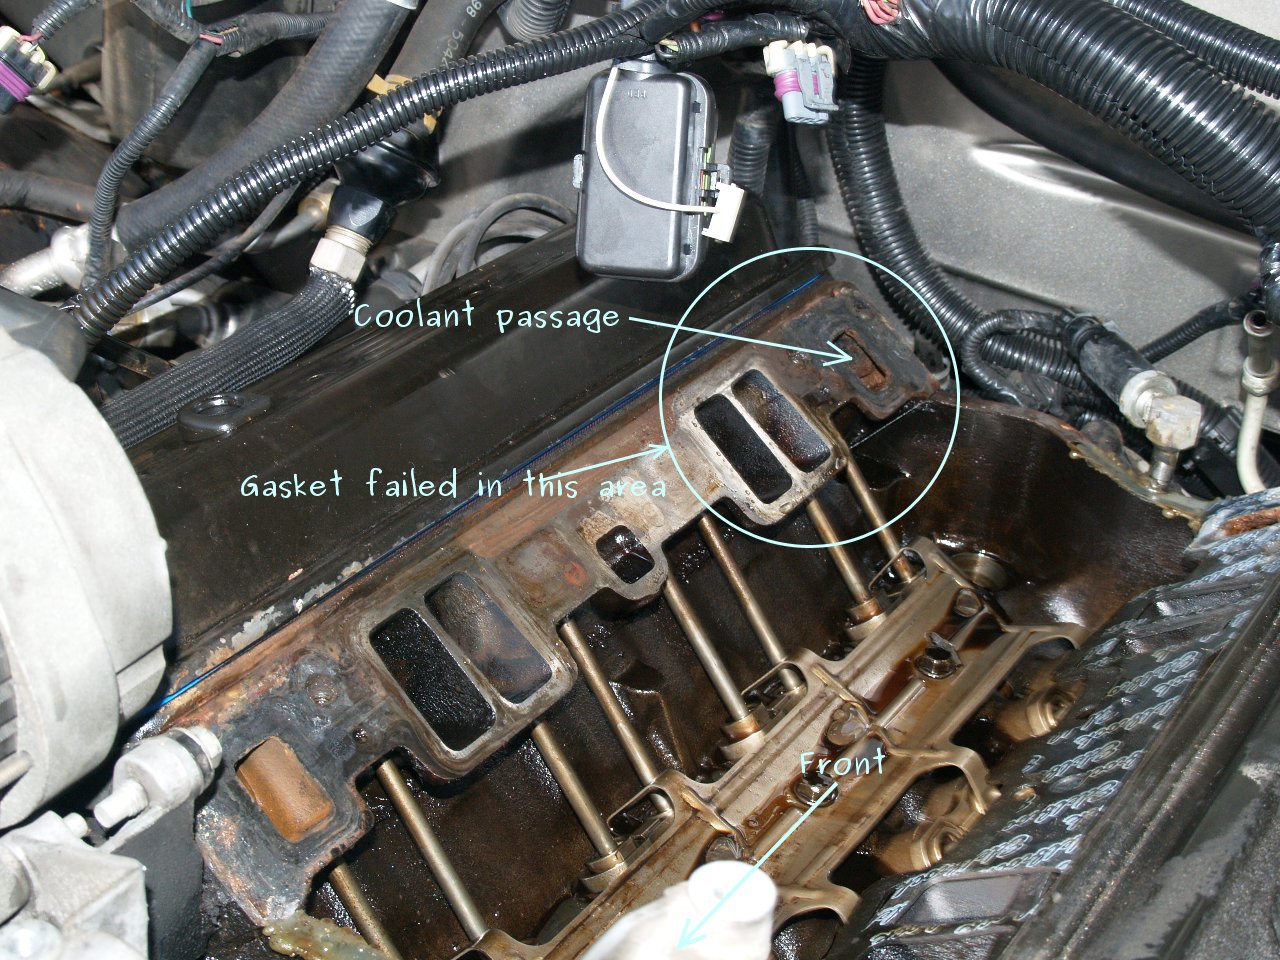 See P173E in engine